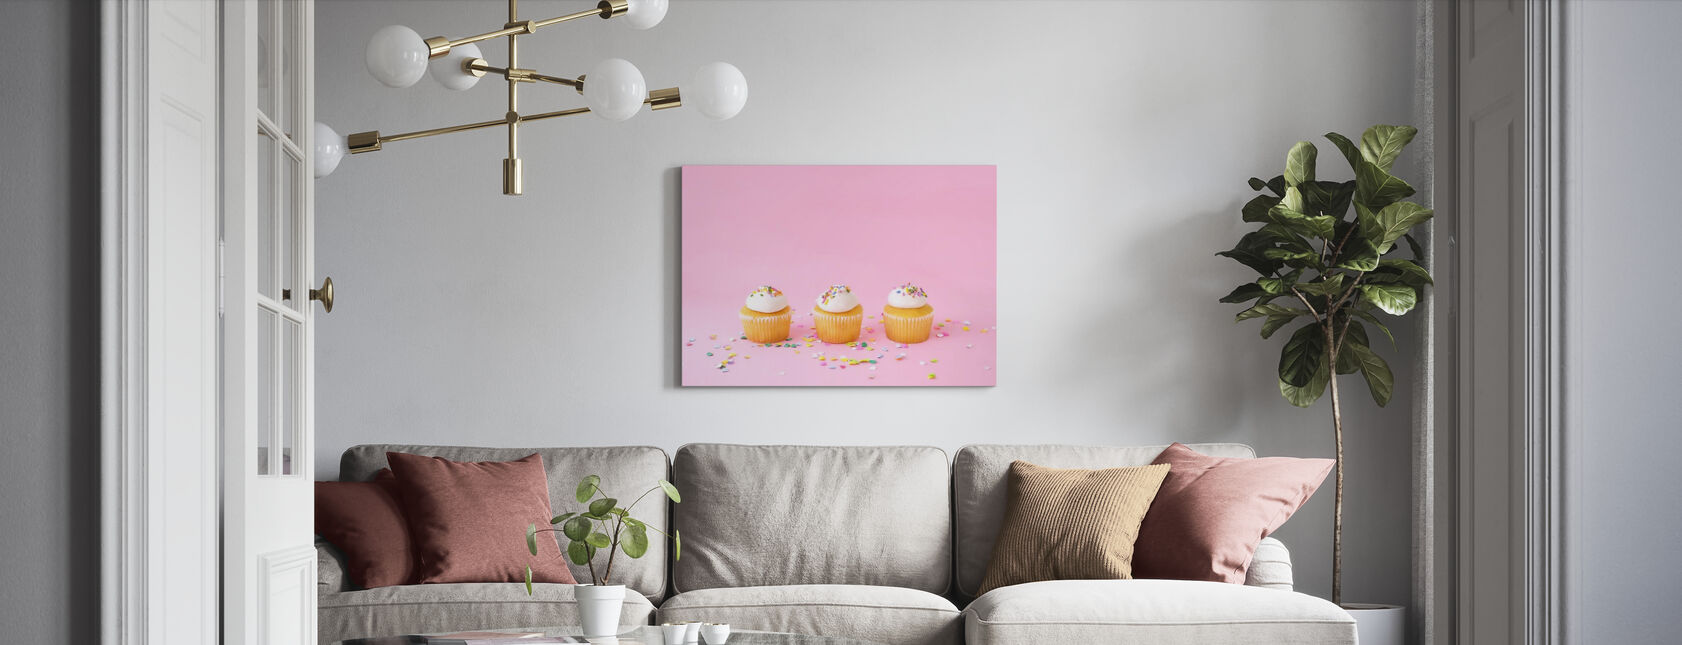 Frosted Cupcakes - Canvas print - Living Room